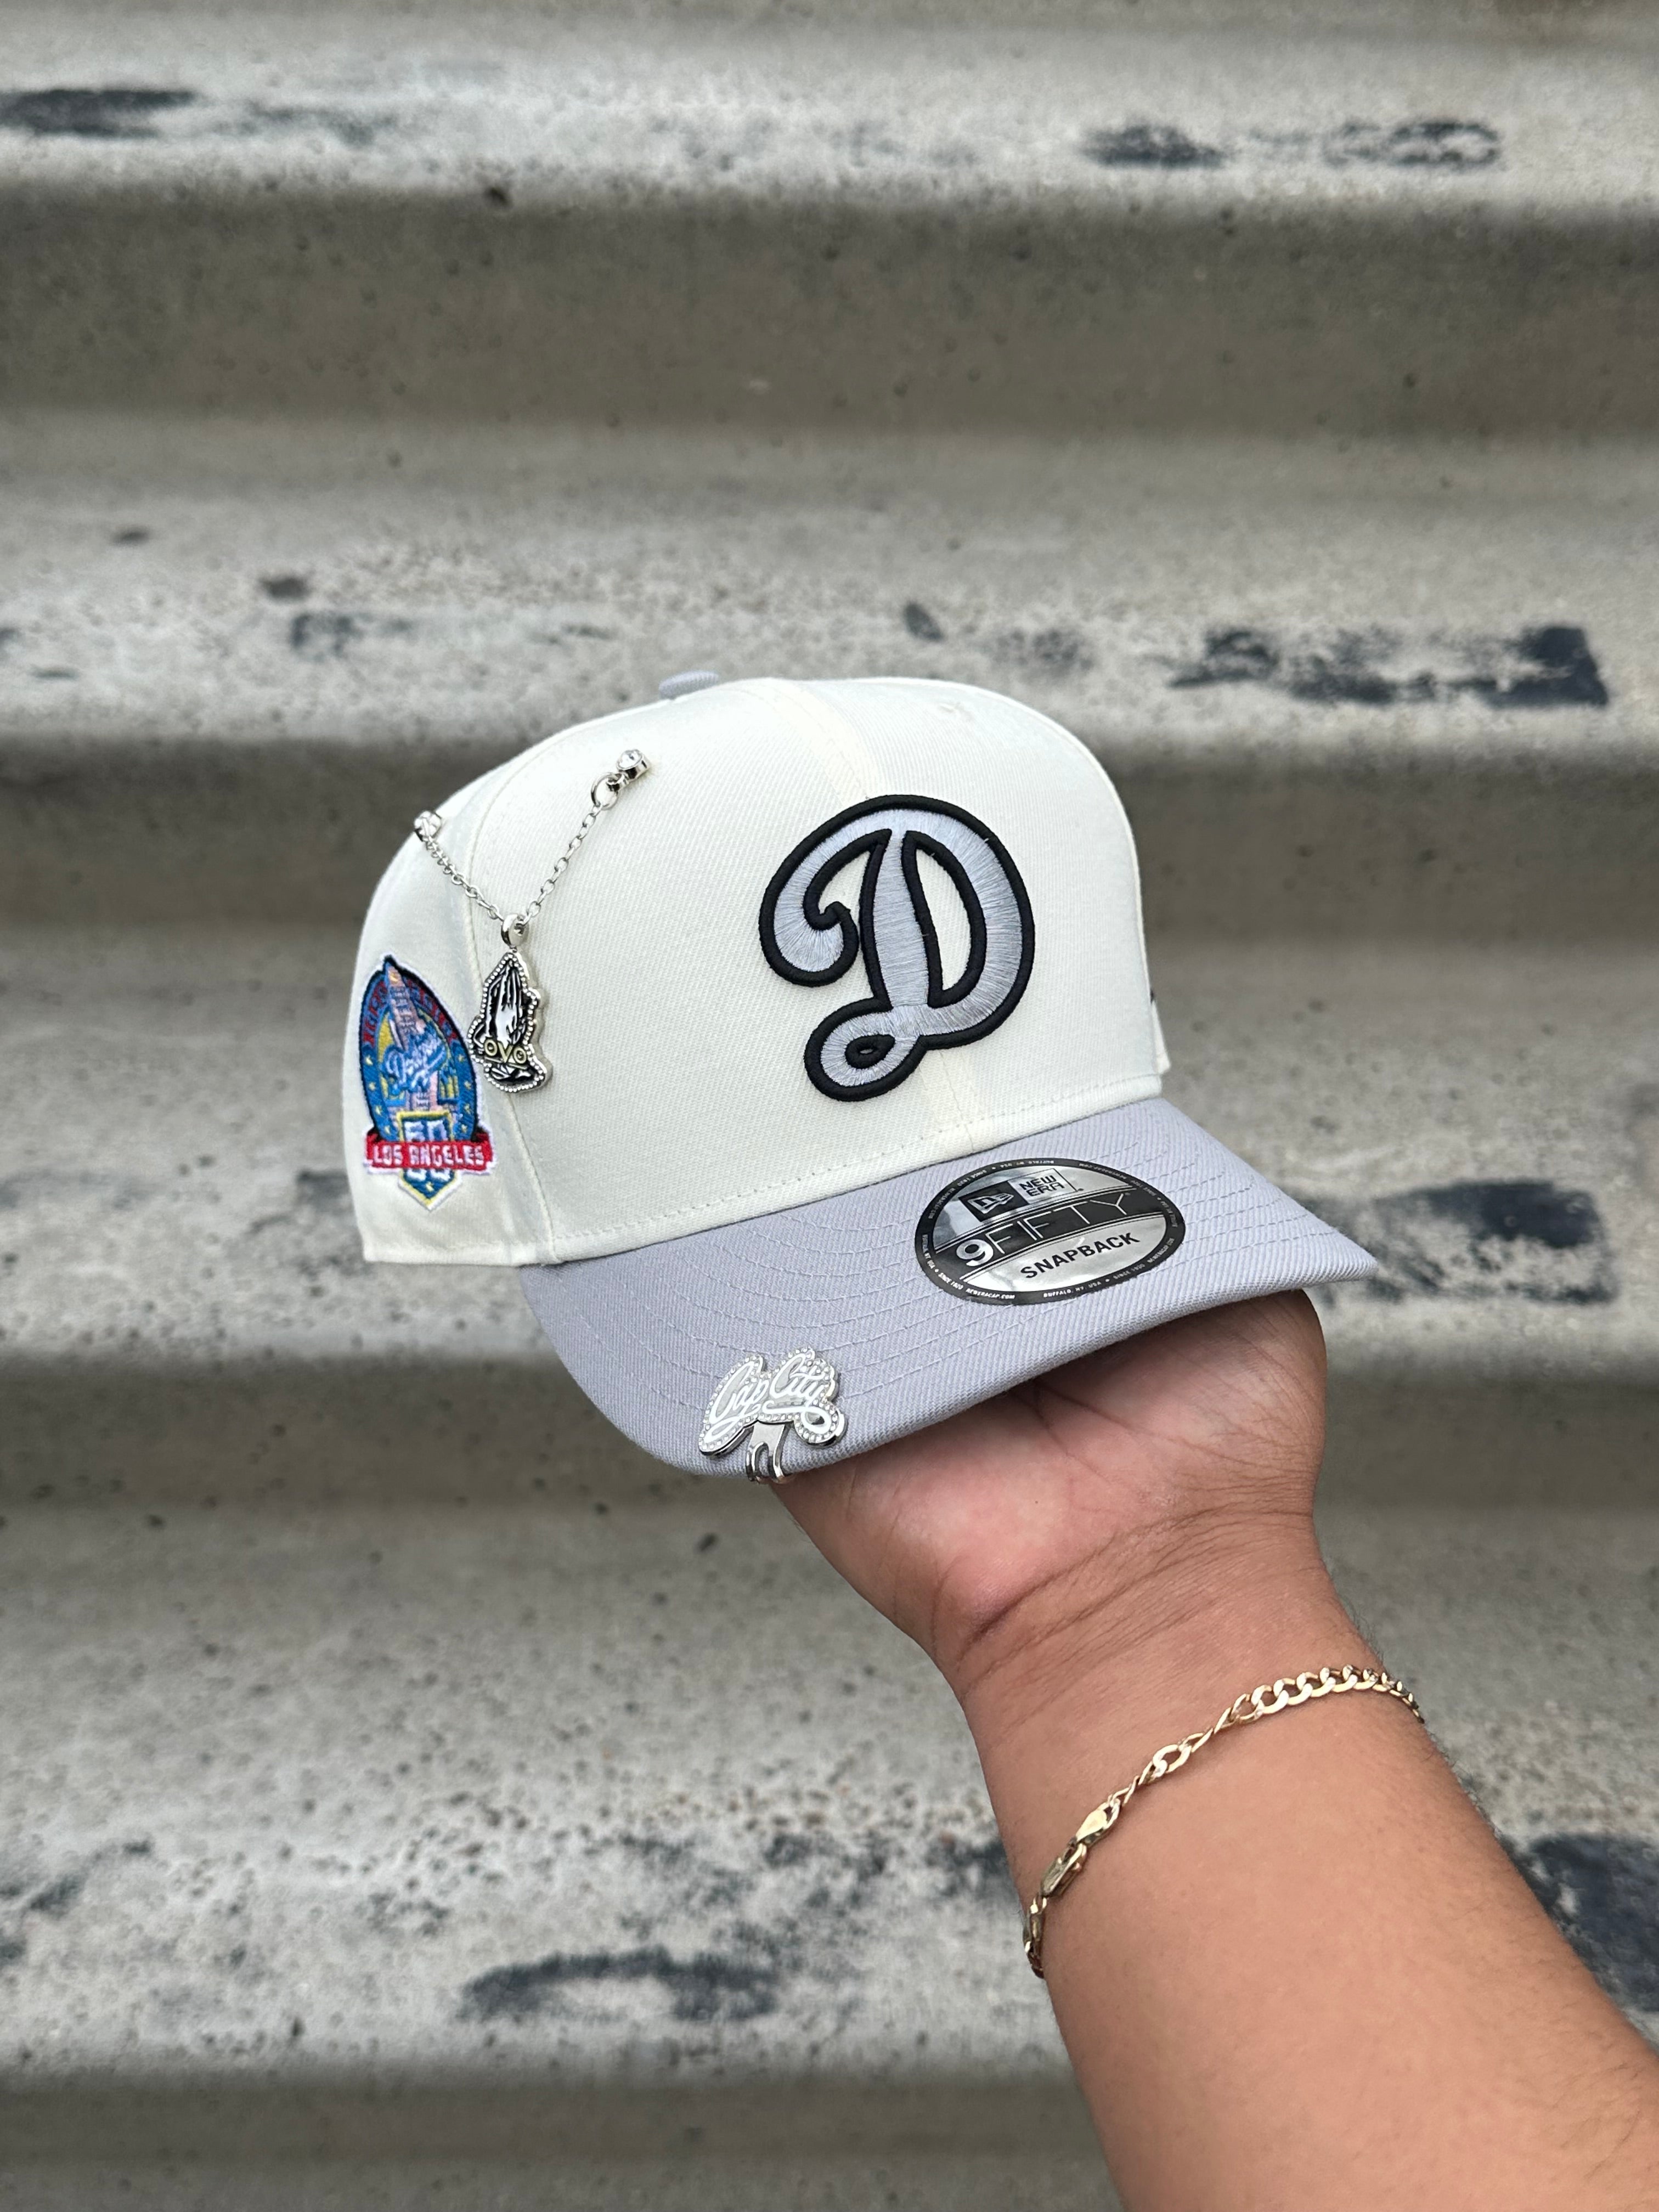 NEW ERA EXCLUSIVE 9FIFTY CHROME WHITE/GREY LOS ANGELES DODGERS SNAPBACK W/ 60TH ANNIVERSARY PATCH